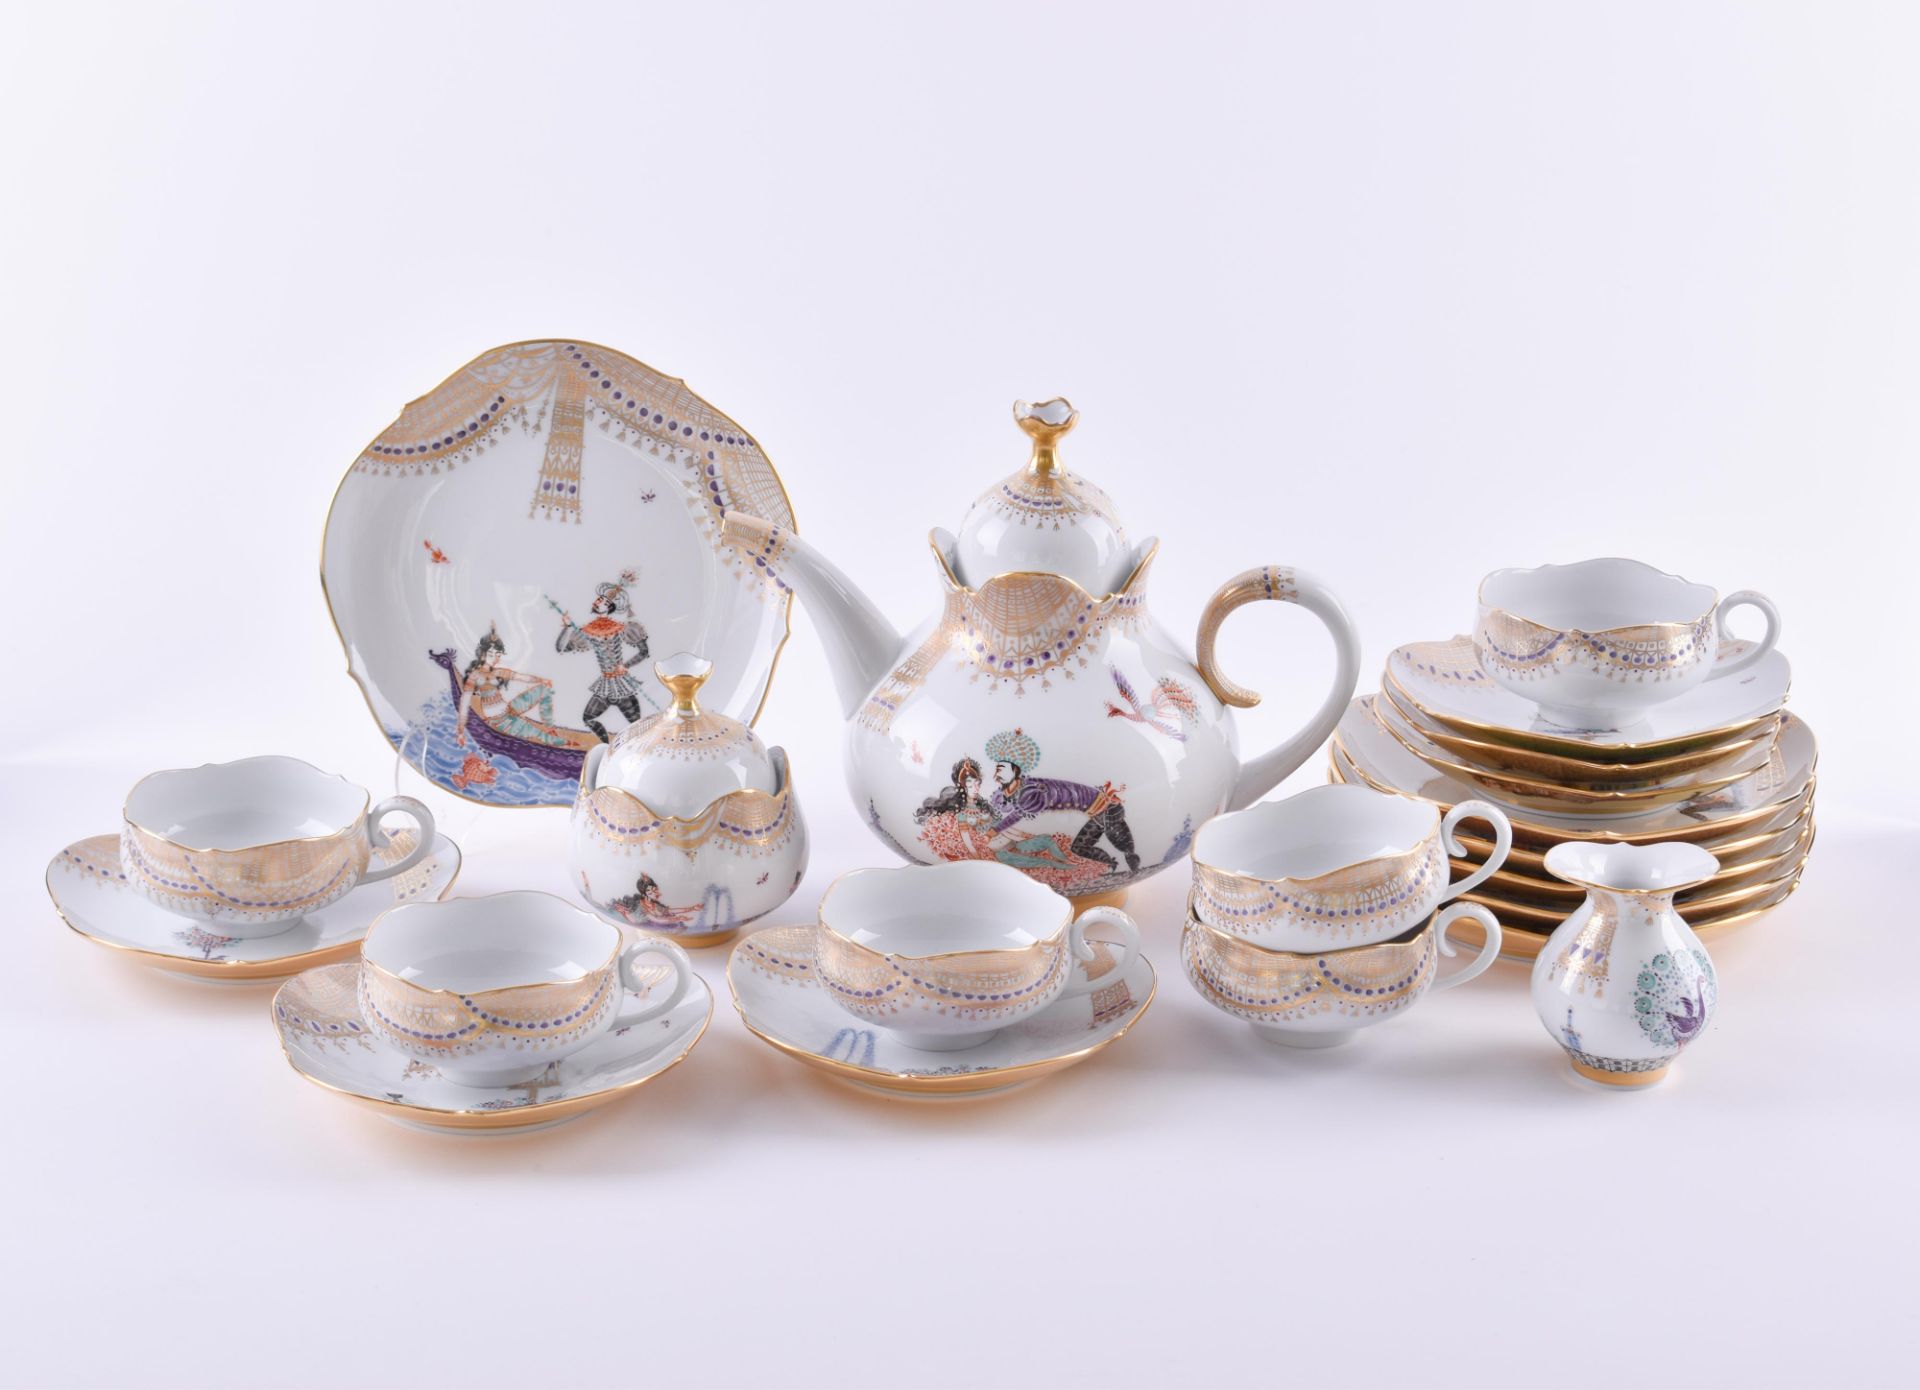 Tea service "The Arabian Nights" Meissen21 pieces, all with beautiful motifs from "The Arabian